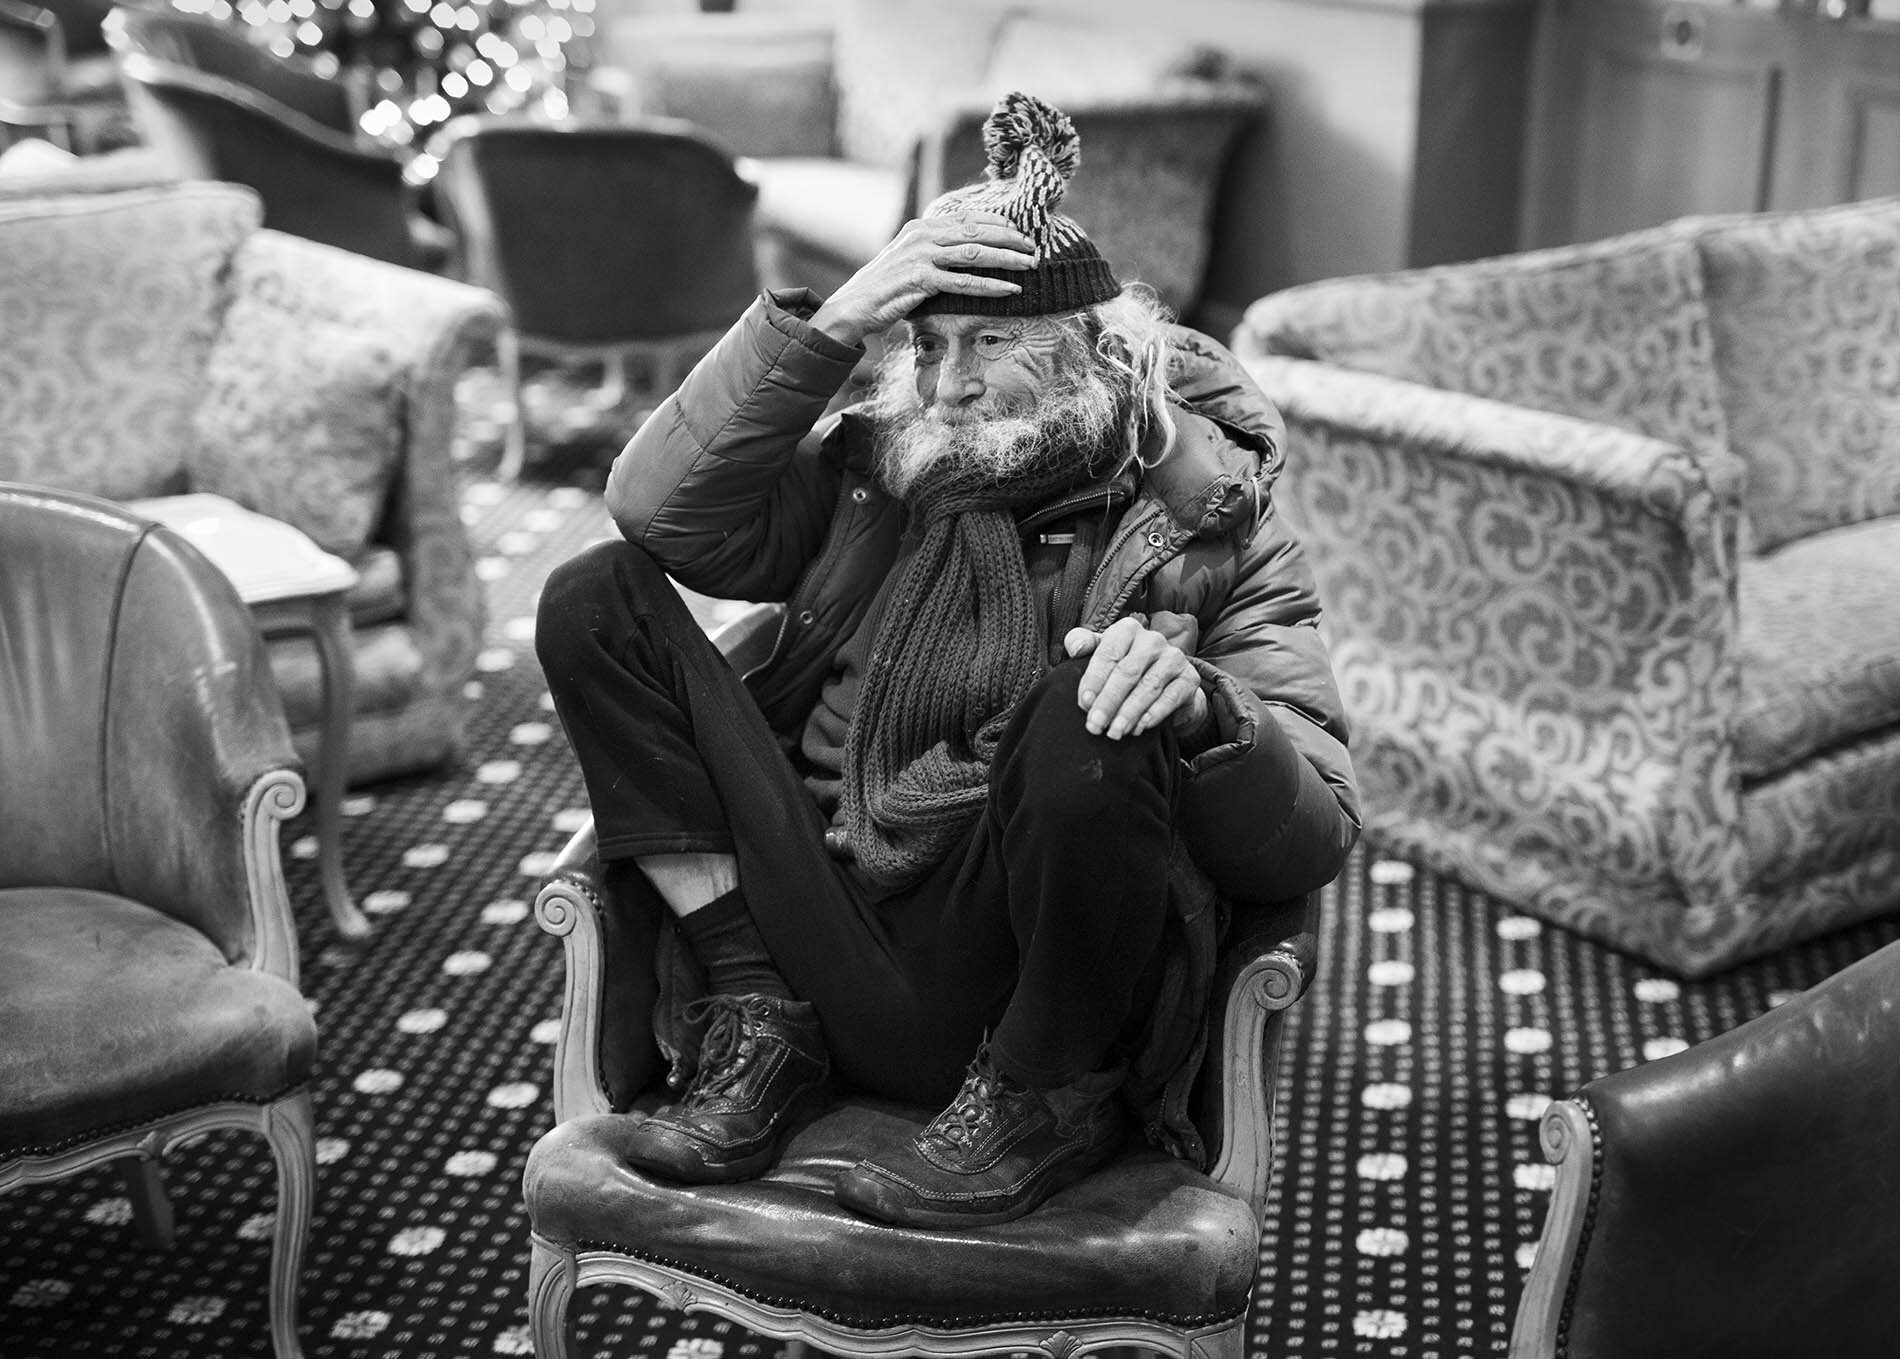  A hotel in Shrewsbury gives refuge to the homeless during the Covid pandemic. 